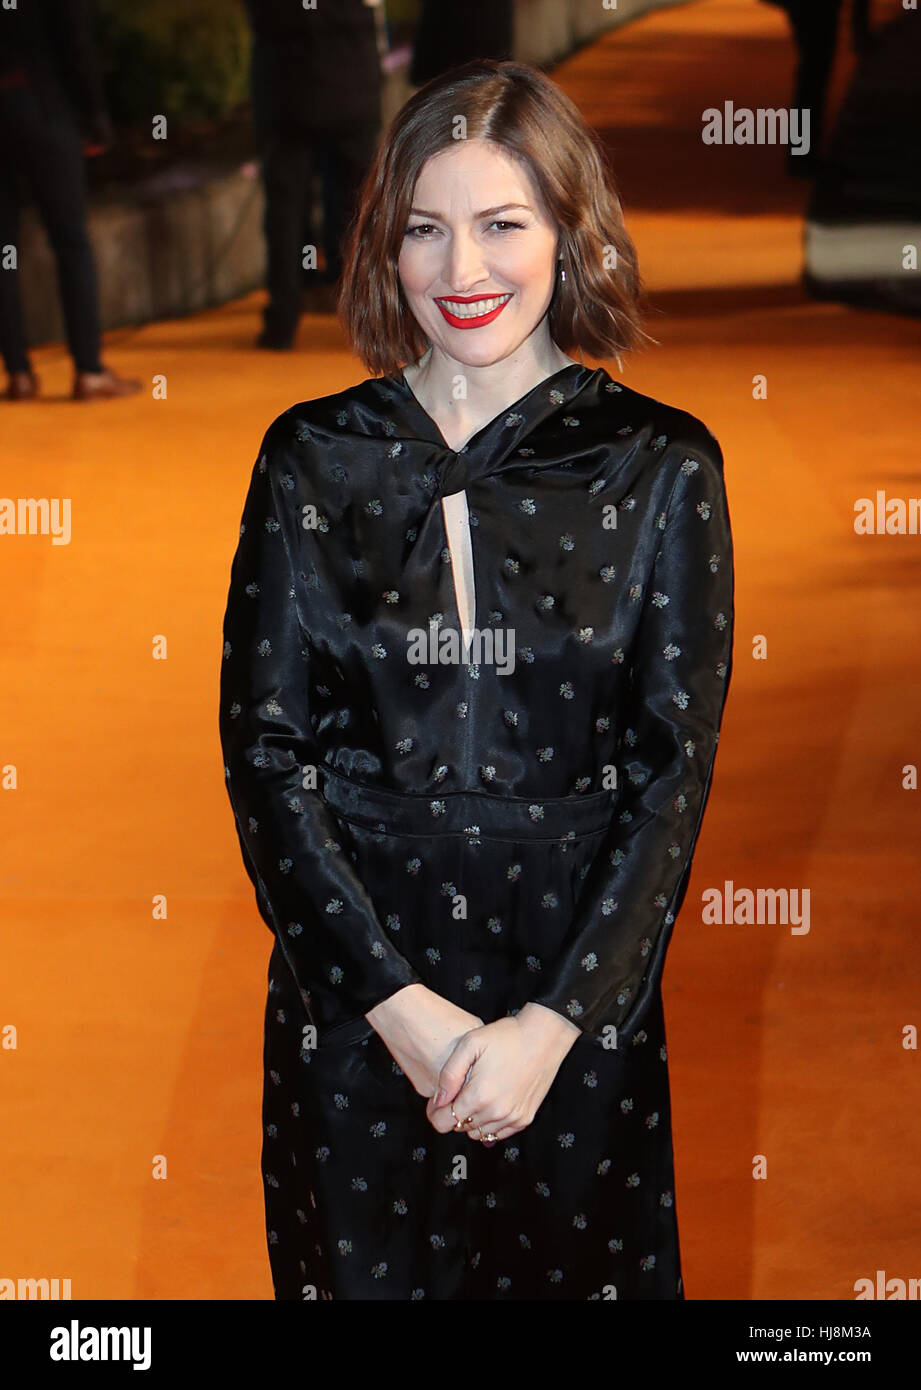 Kelly Macdonald arriving at the world premiere of Trainspotting 2 at Cineworld in Edinburgh. Stock Photo